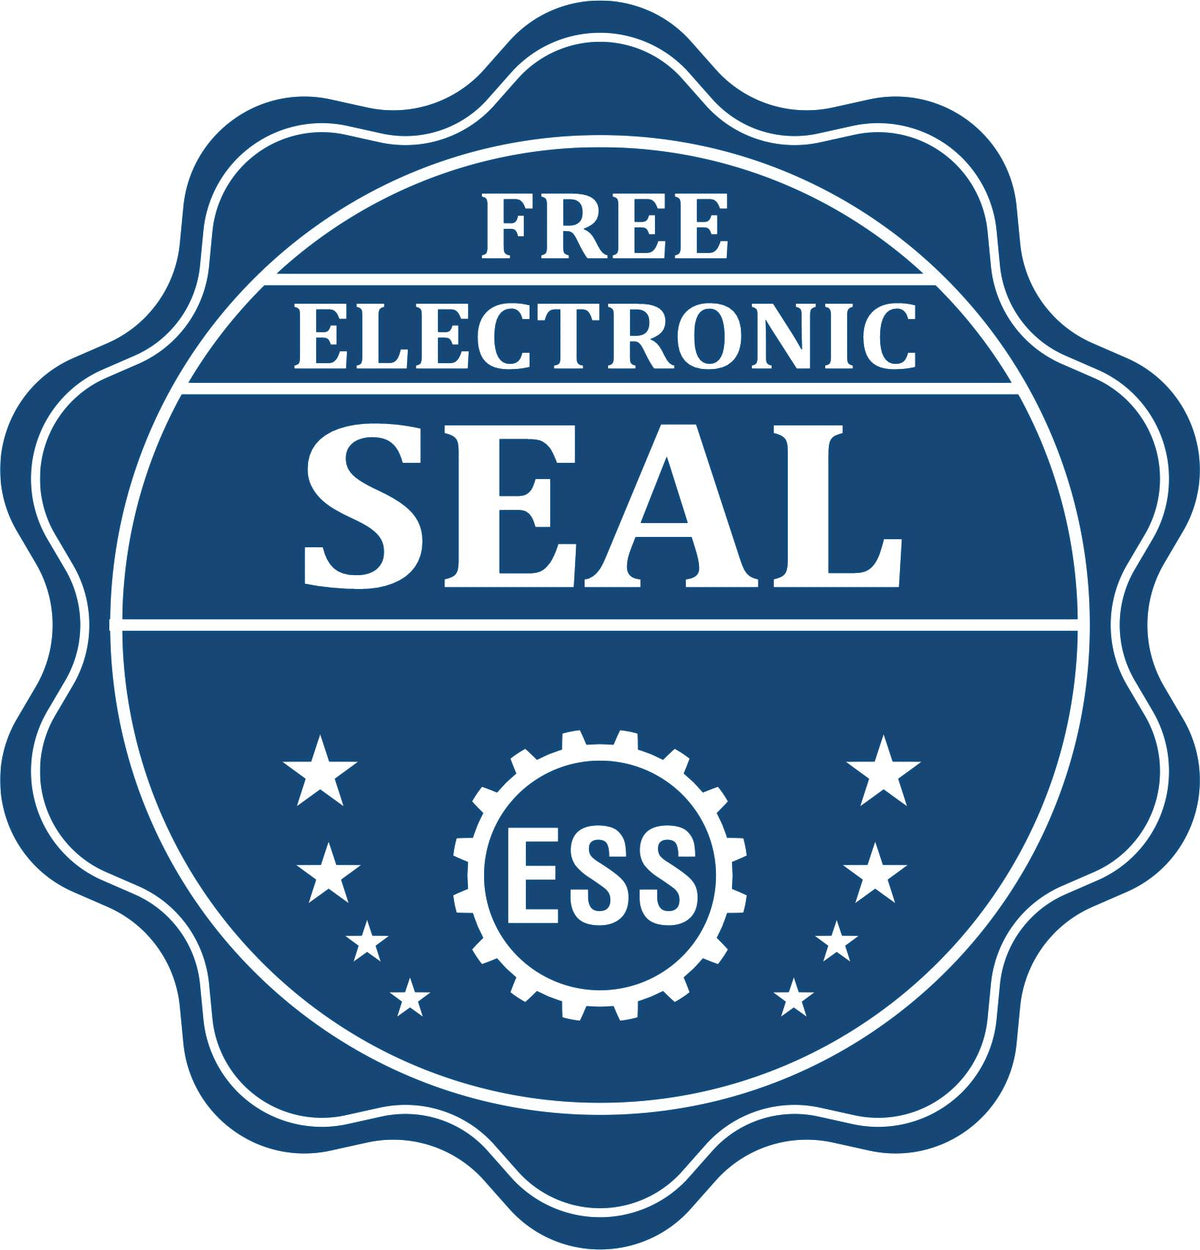 A badge showing a free electronic seal for the Gift New Jersey Land Surveyor Seal with stars and the ESS gear on the emblem.